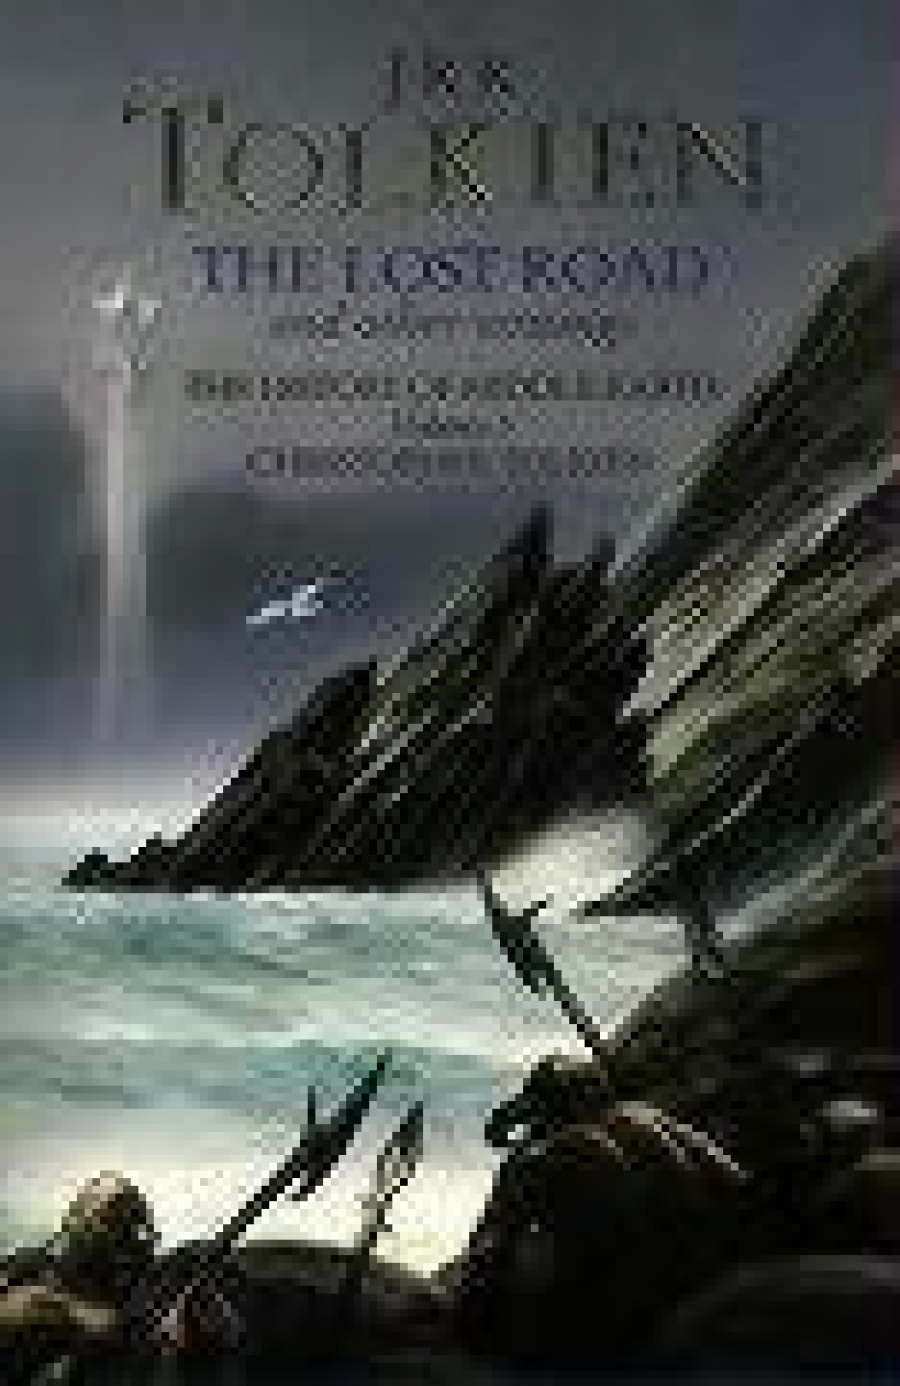 J R.R.T. The Lost Road and Other Writings (The History of Middle-Earth) 